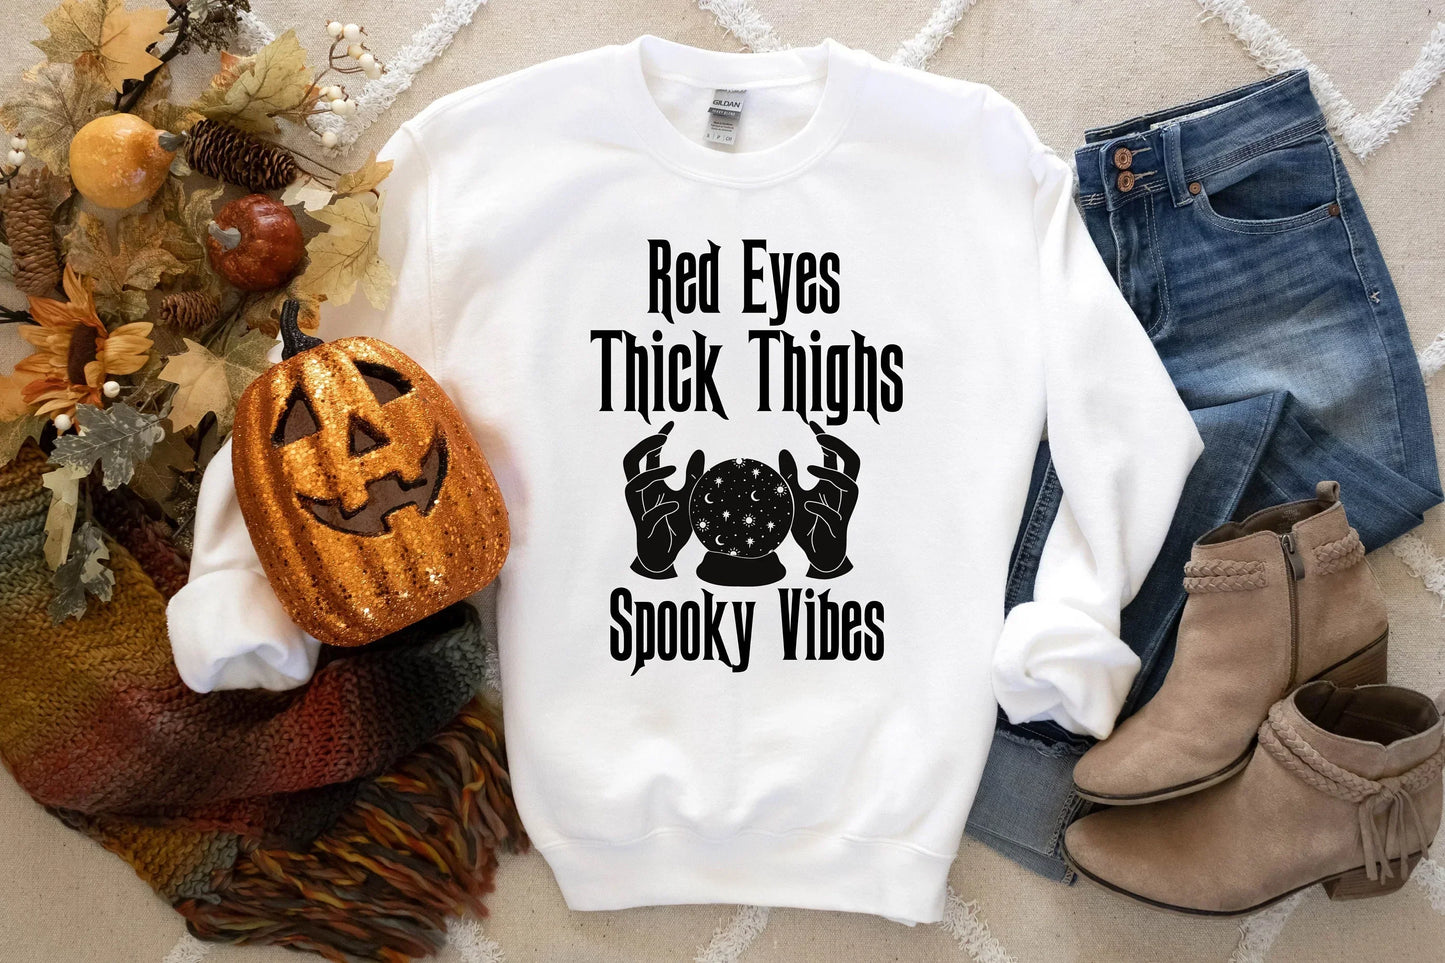 Red Eyes Thick Thighs and Spooky Vibes Halloween Stoner Shirt for Her